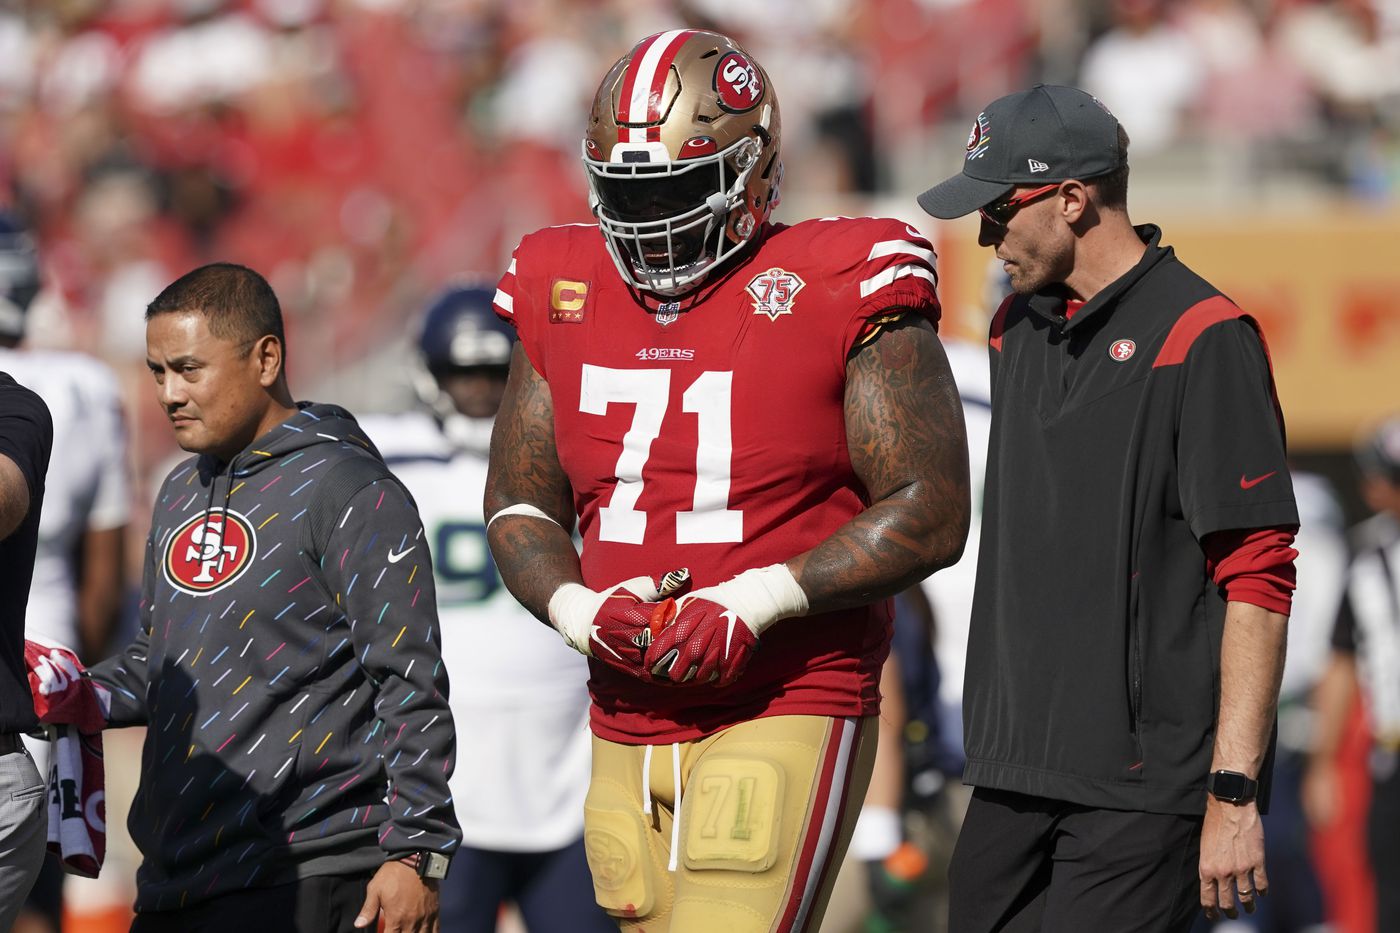 49ers inactives, NFC Championship: Williams, Wilson lead list for San Francisco ahead of conference title game